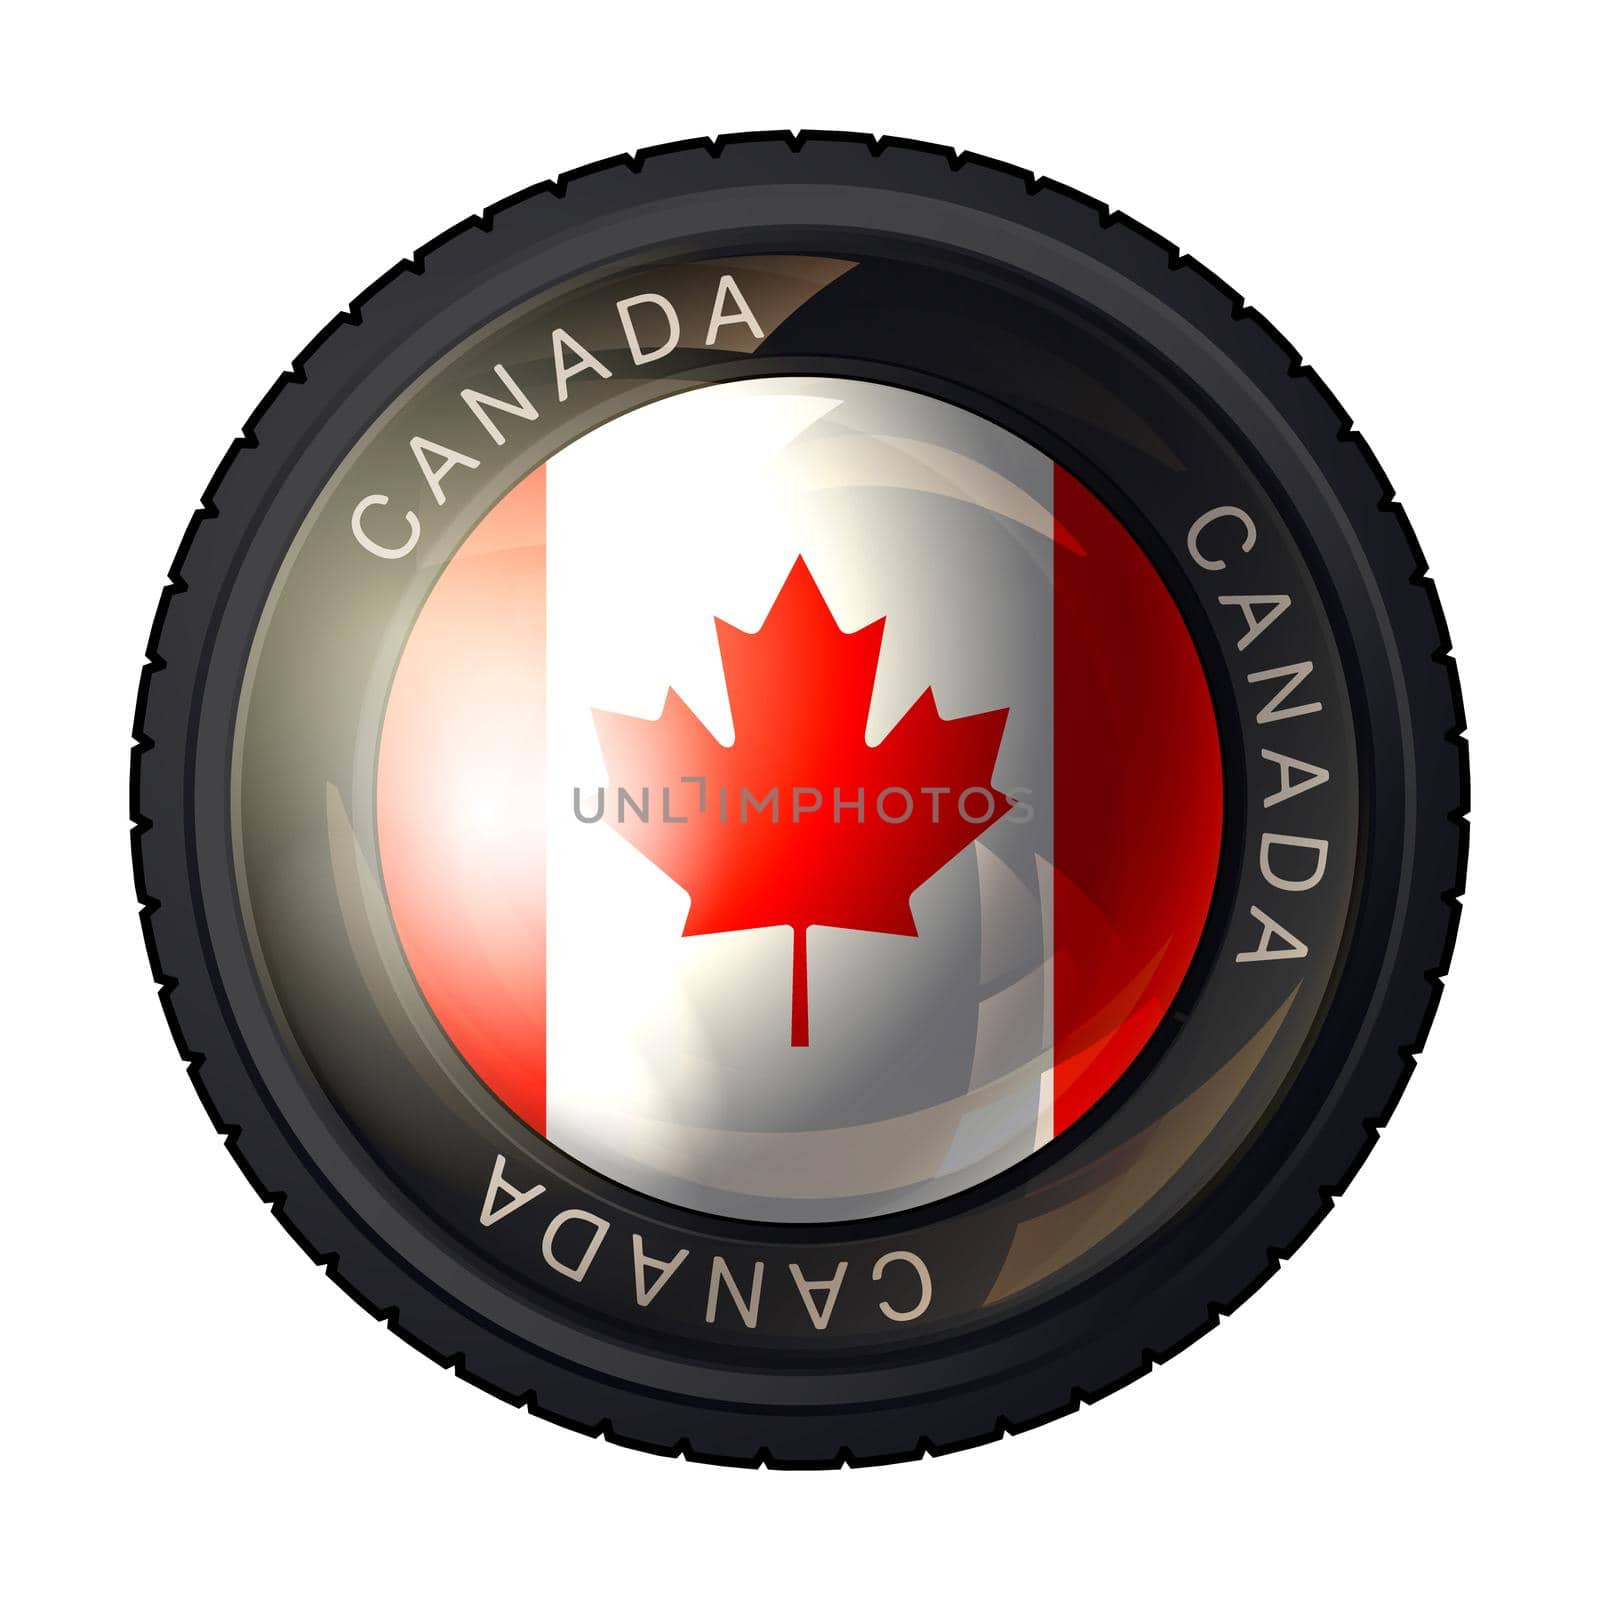 Canada flag icon. Flag of Canada in a camera lens on white background. Vector illustration.